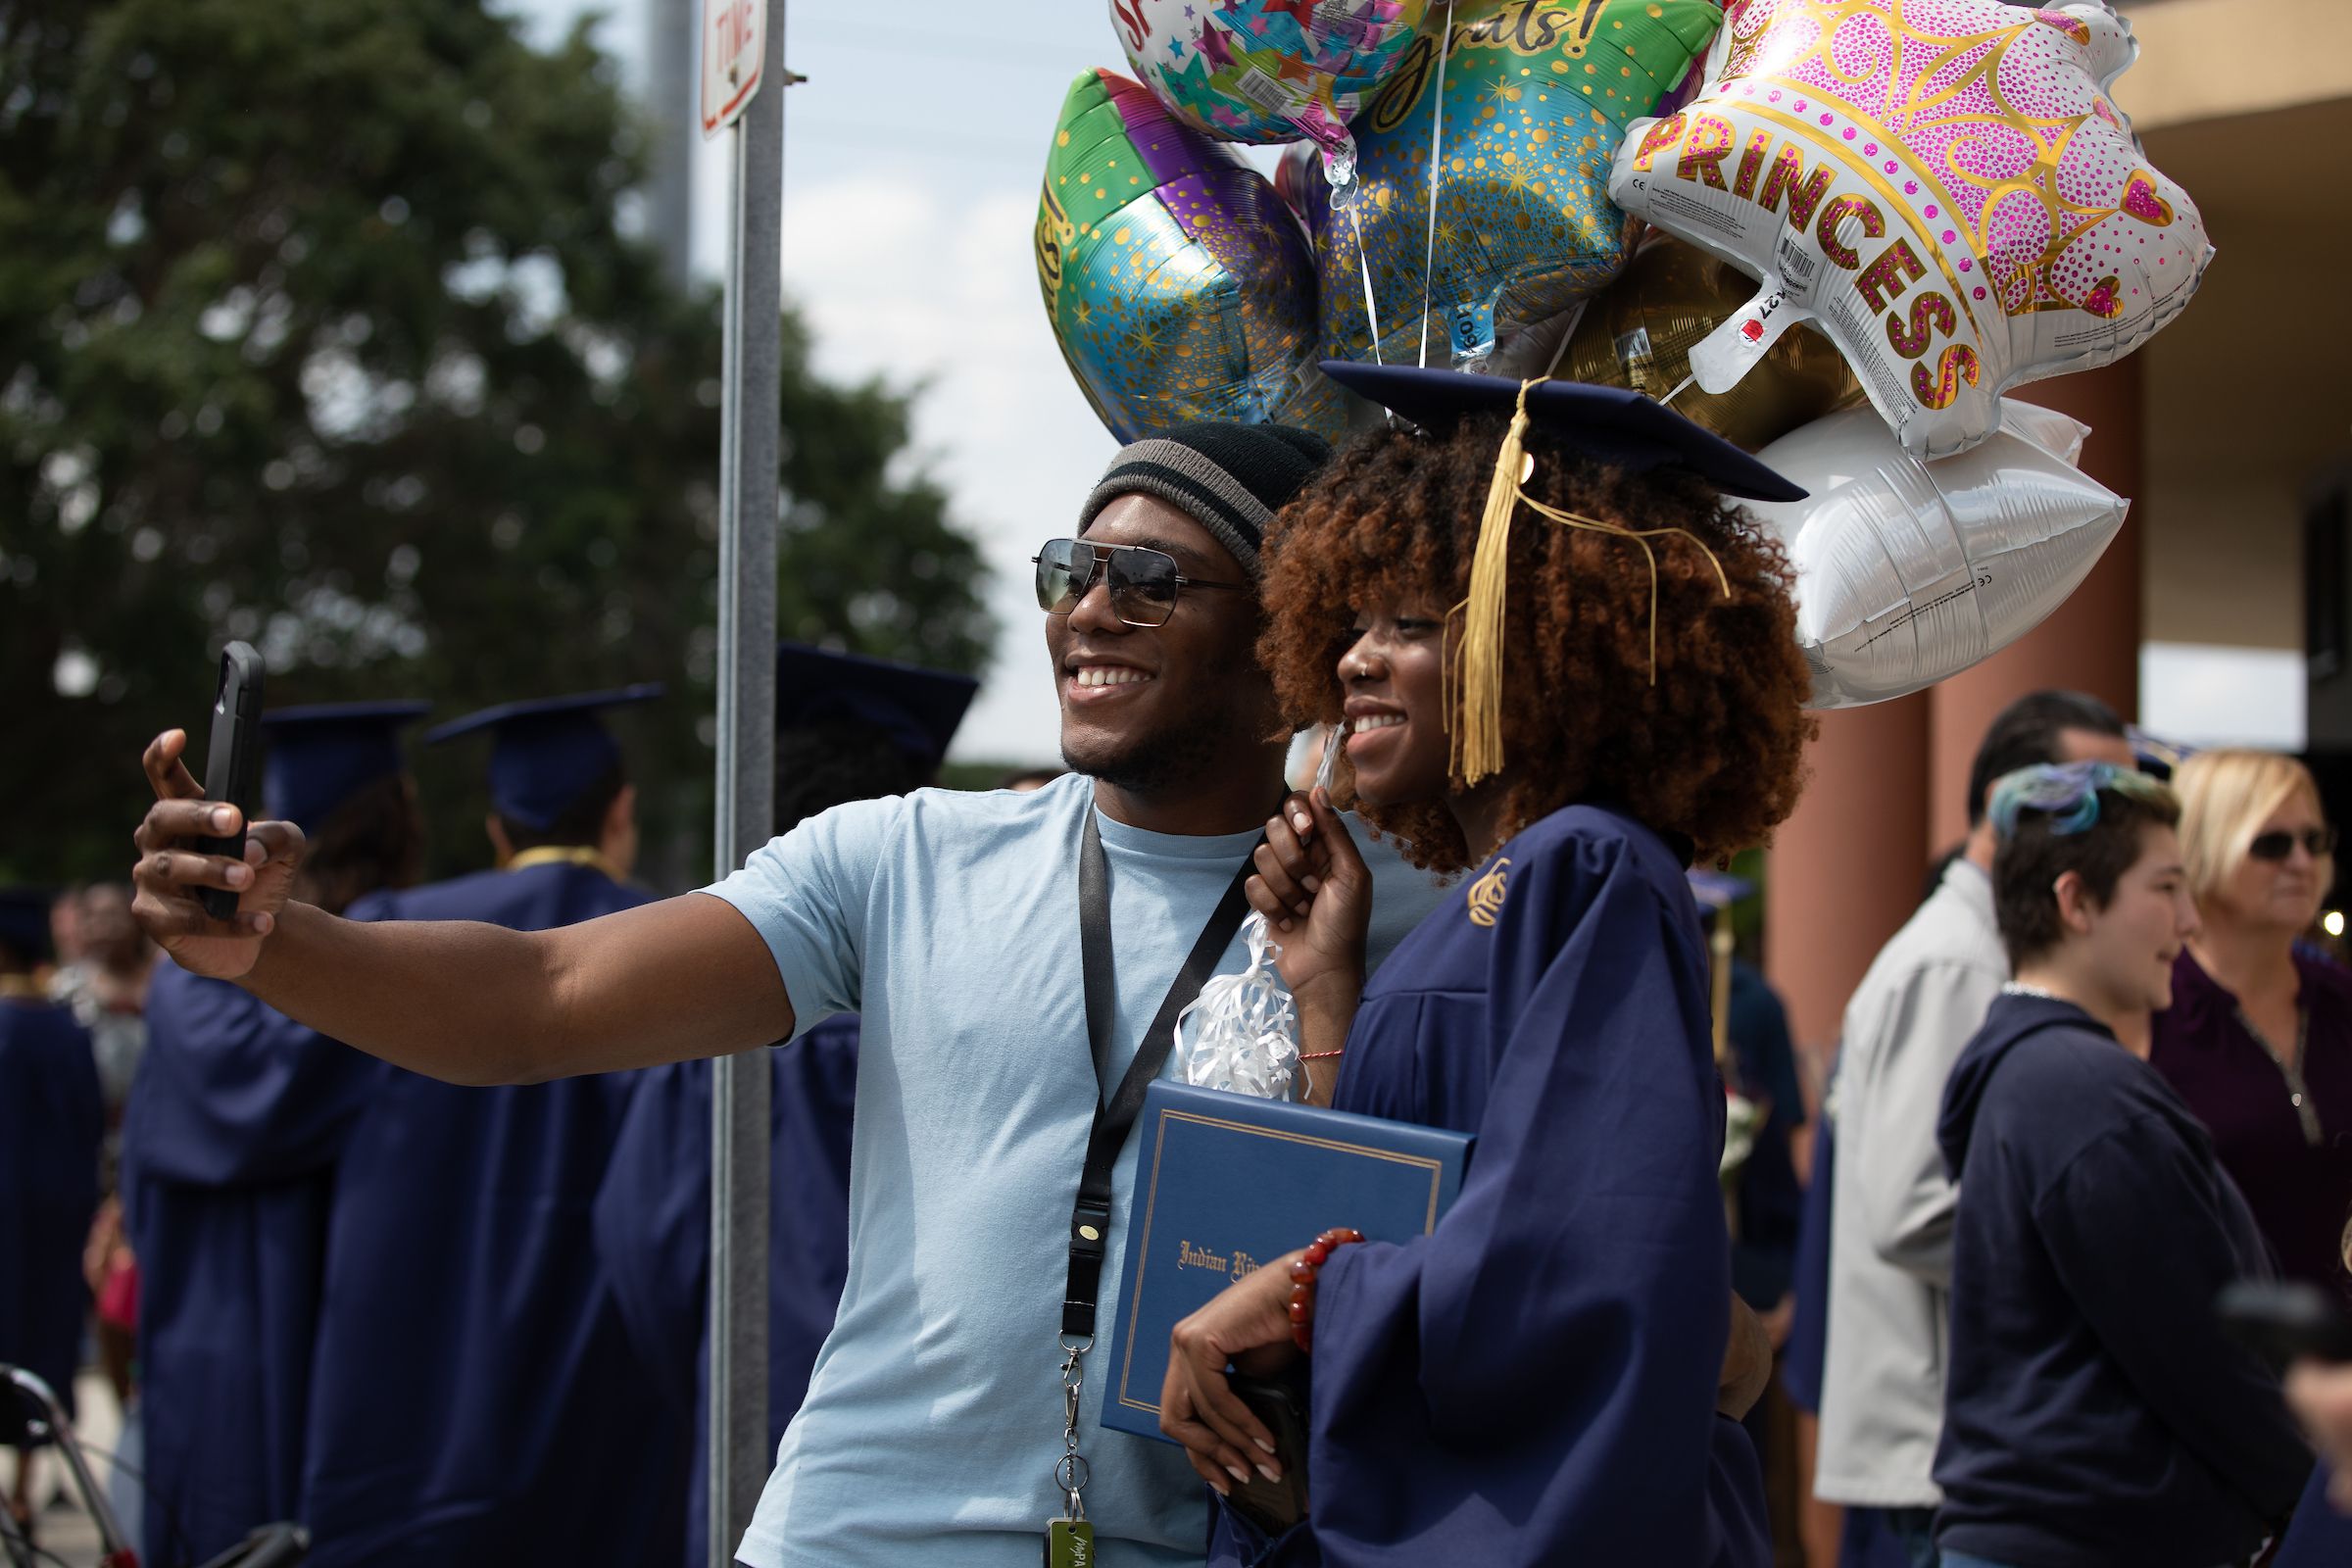 Person taking a selfie with college graduate in cap and gown.